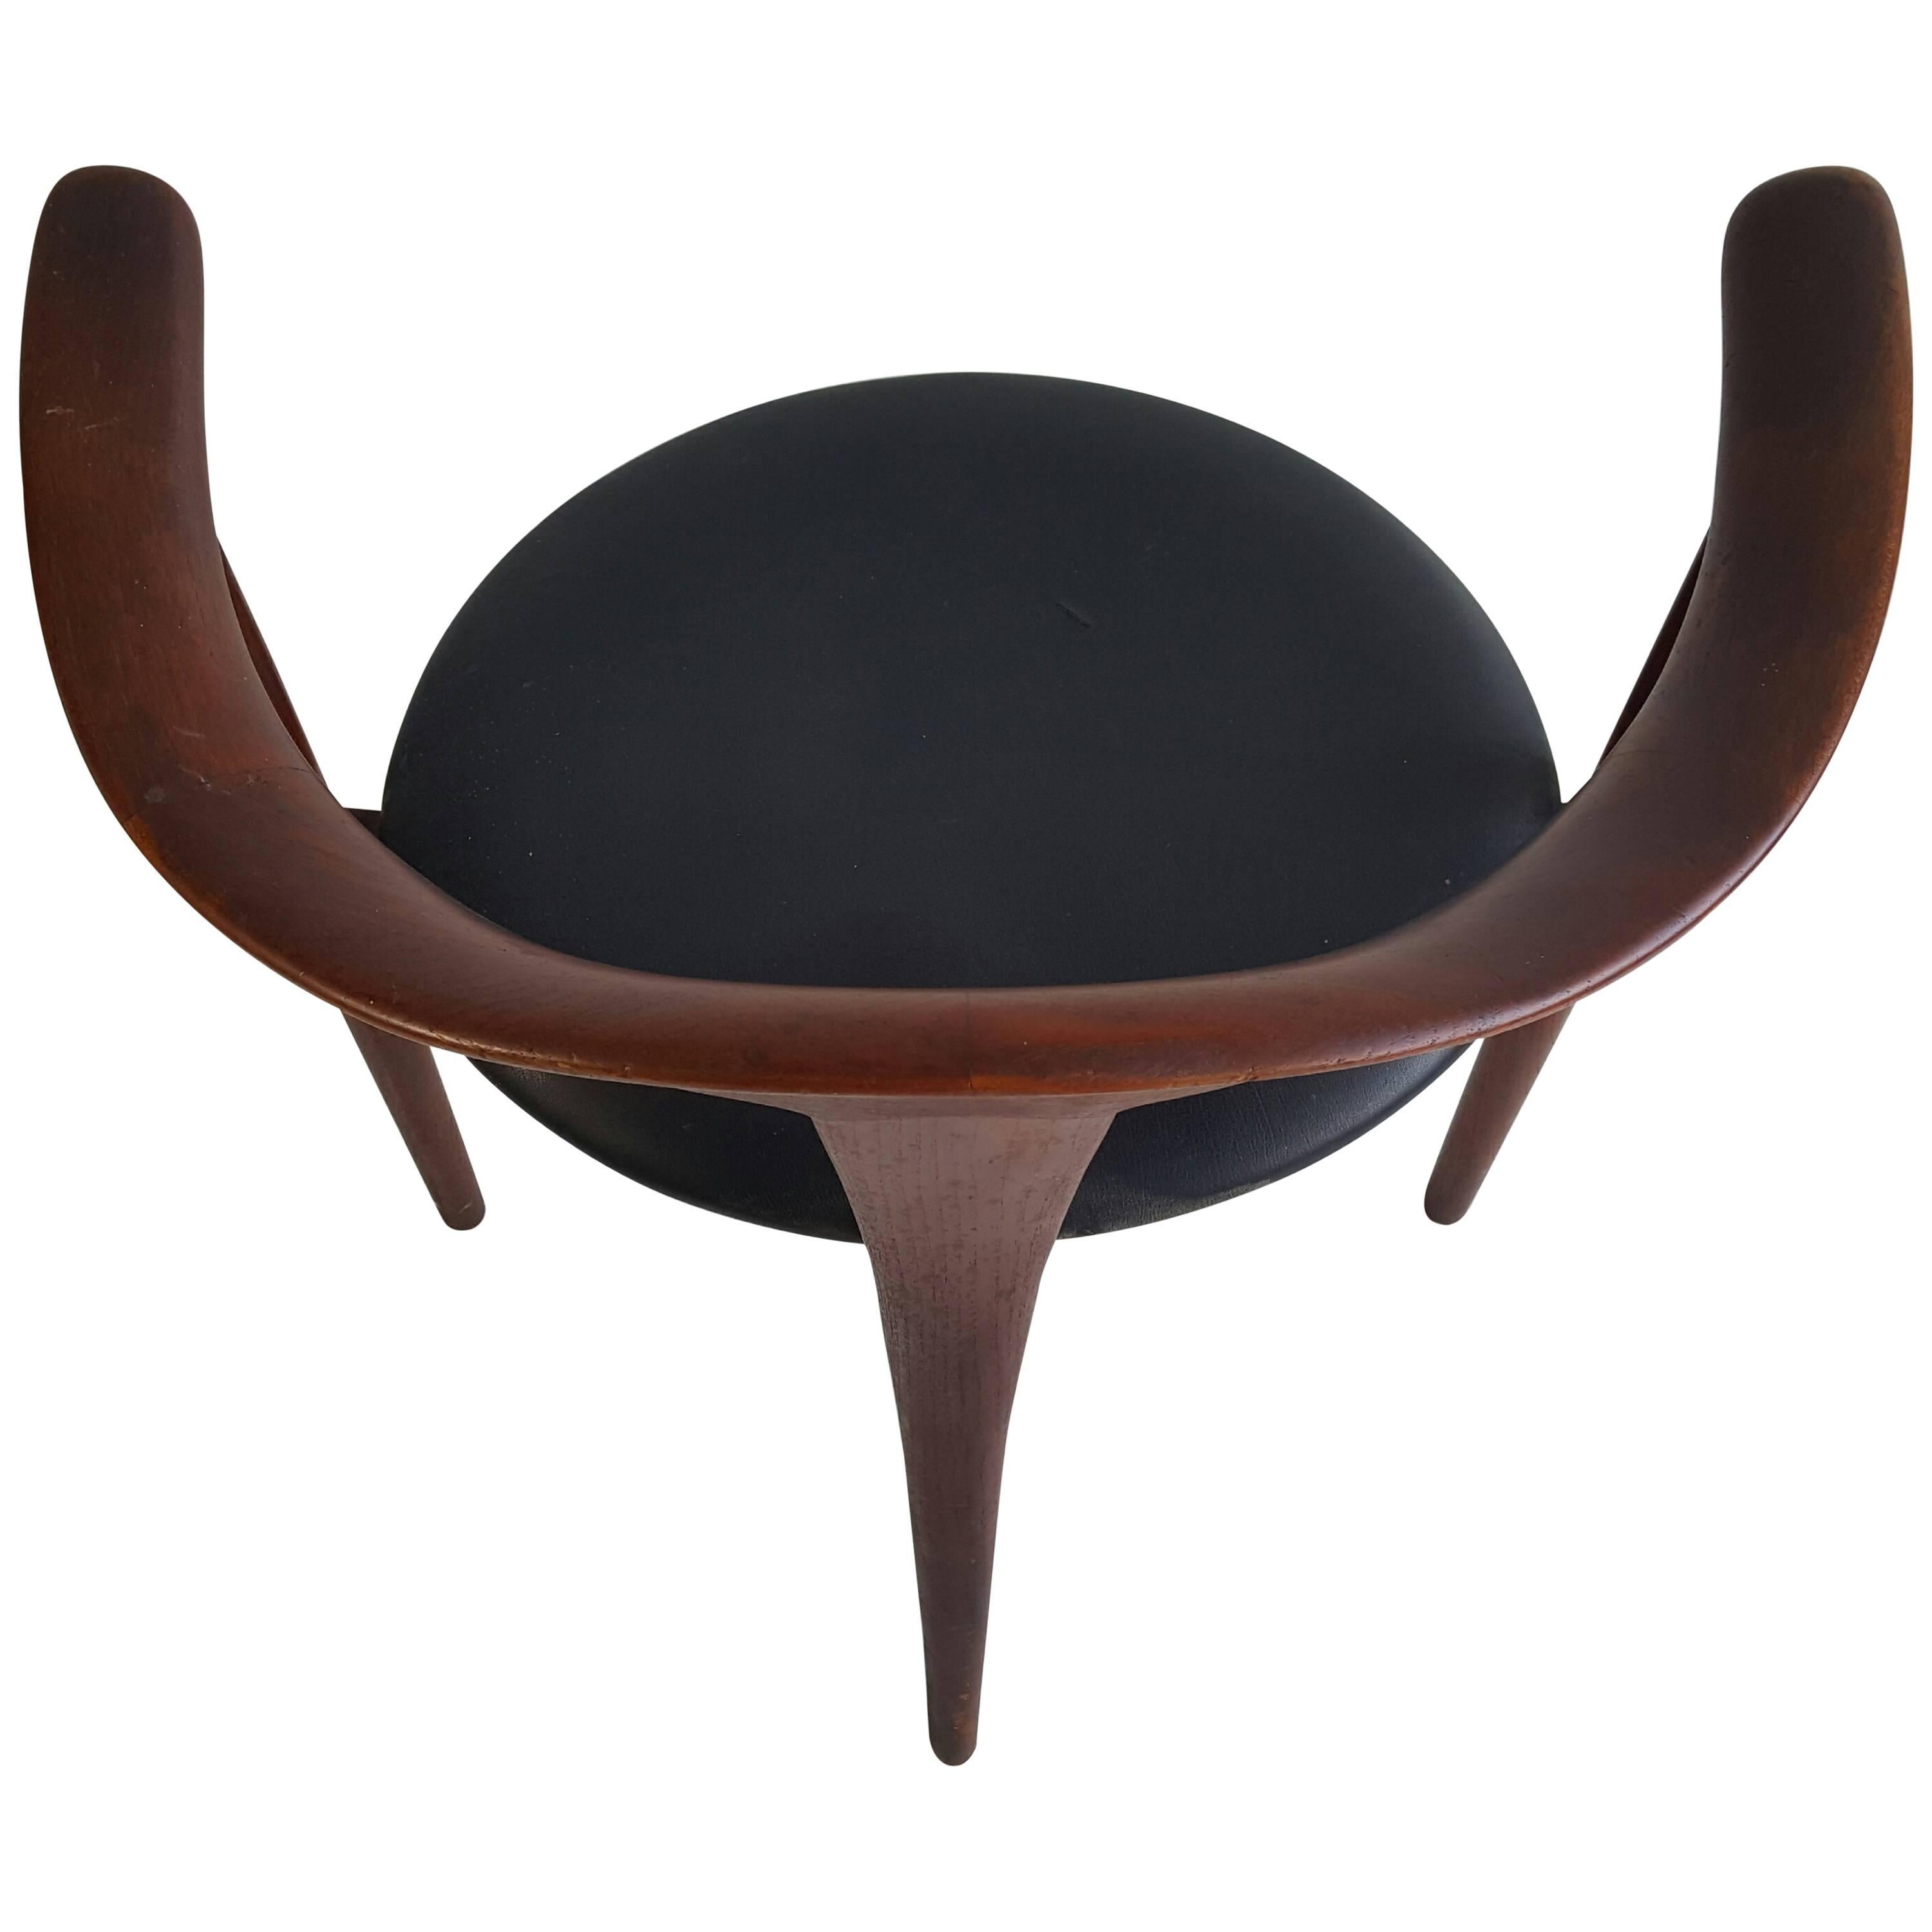 Modernist Sculptural Walnut and Leather Armchair by Johannes Andersen